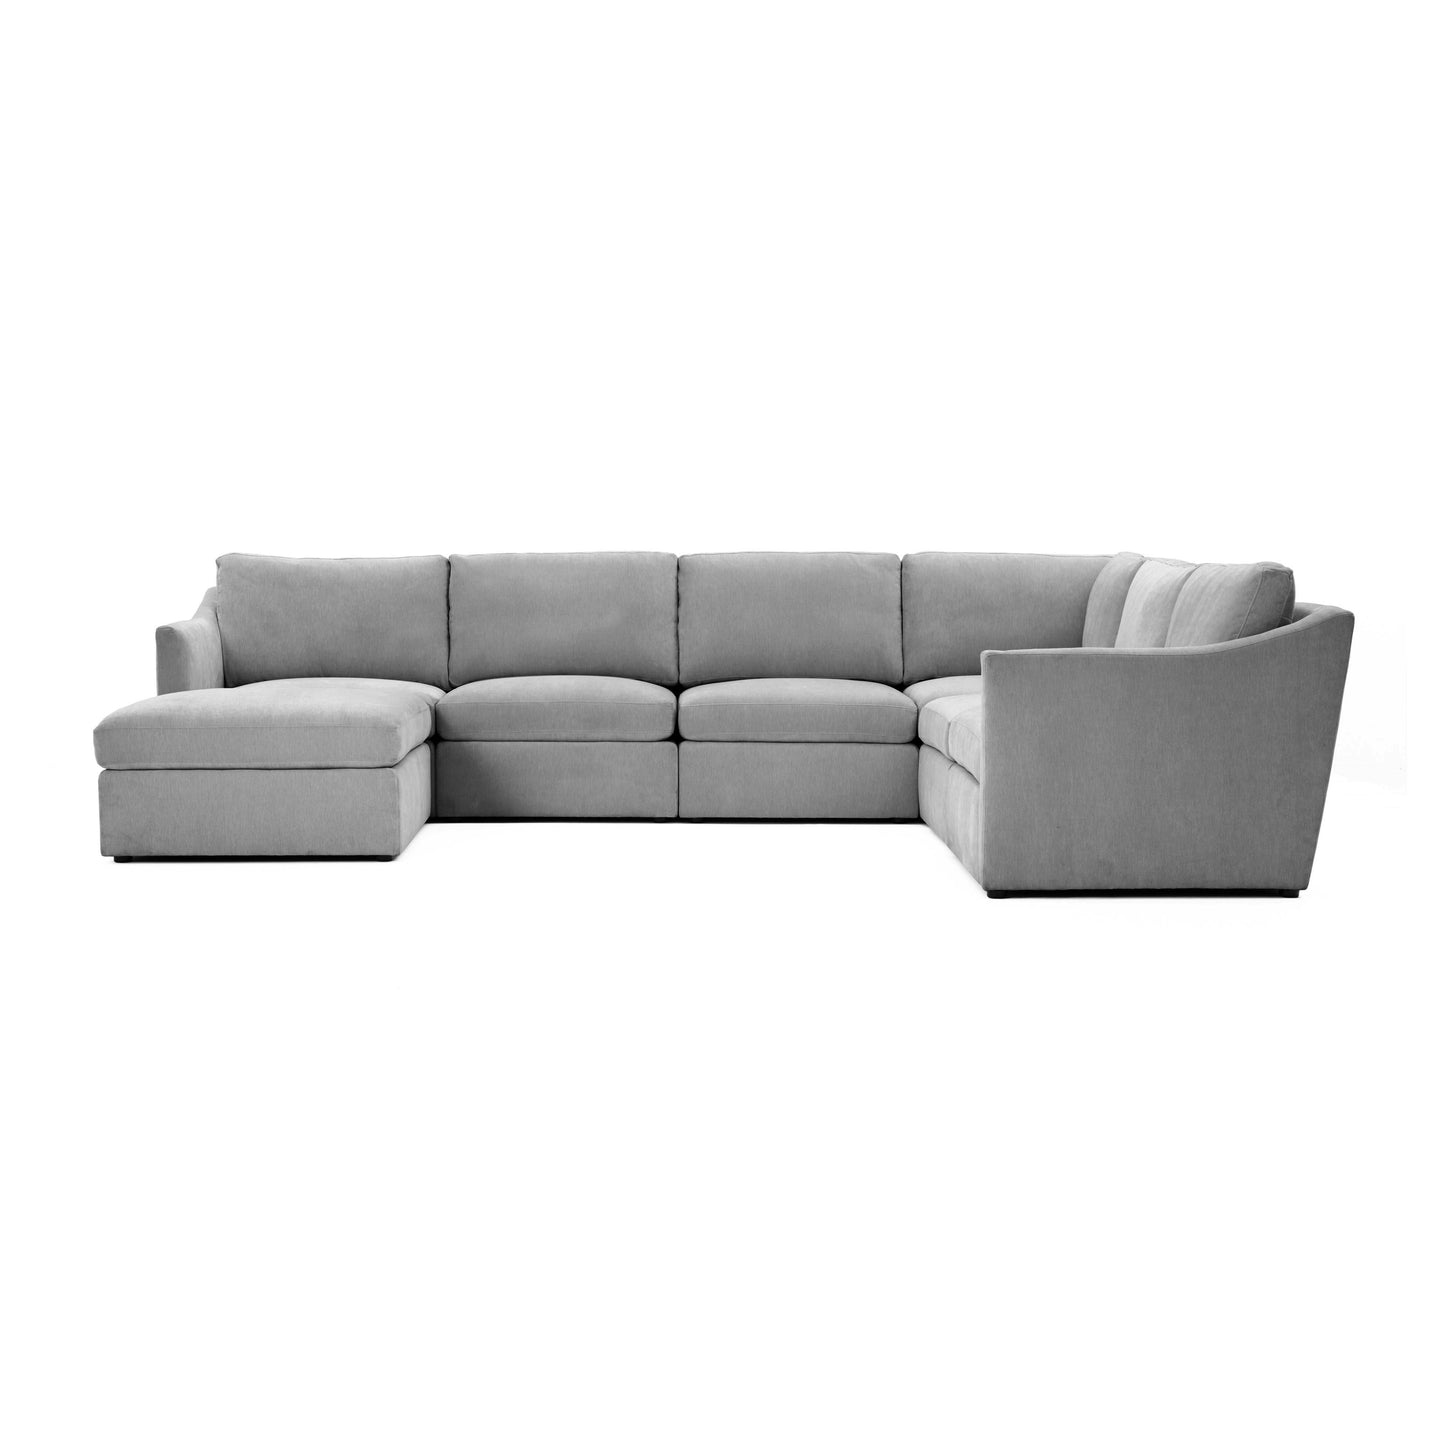 libre gray modular large chaise sectional